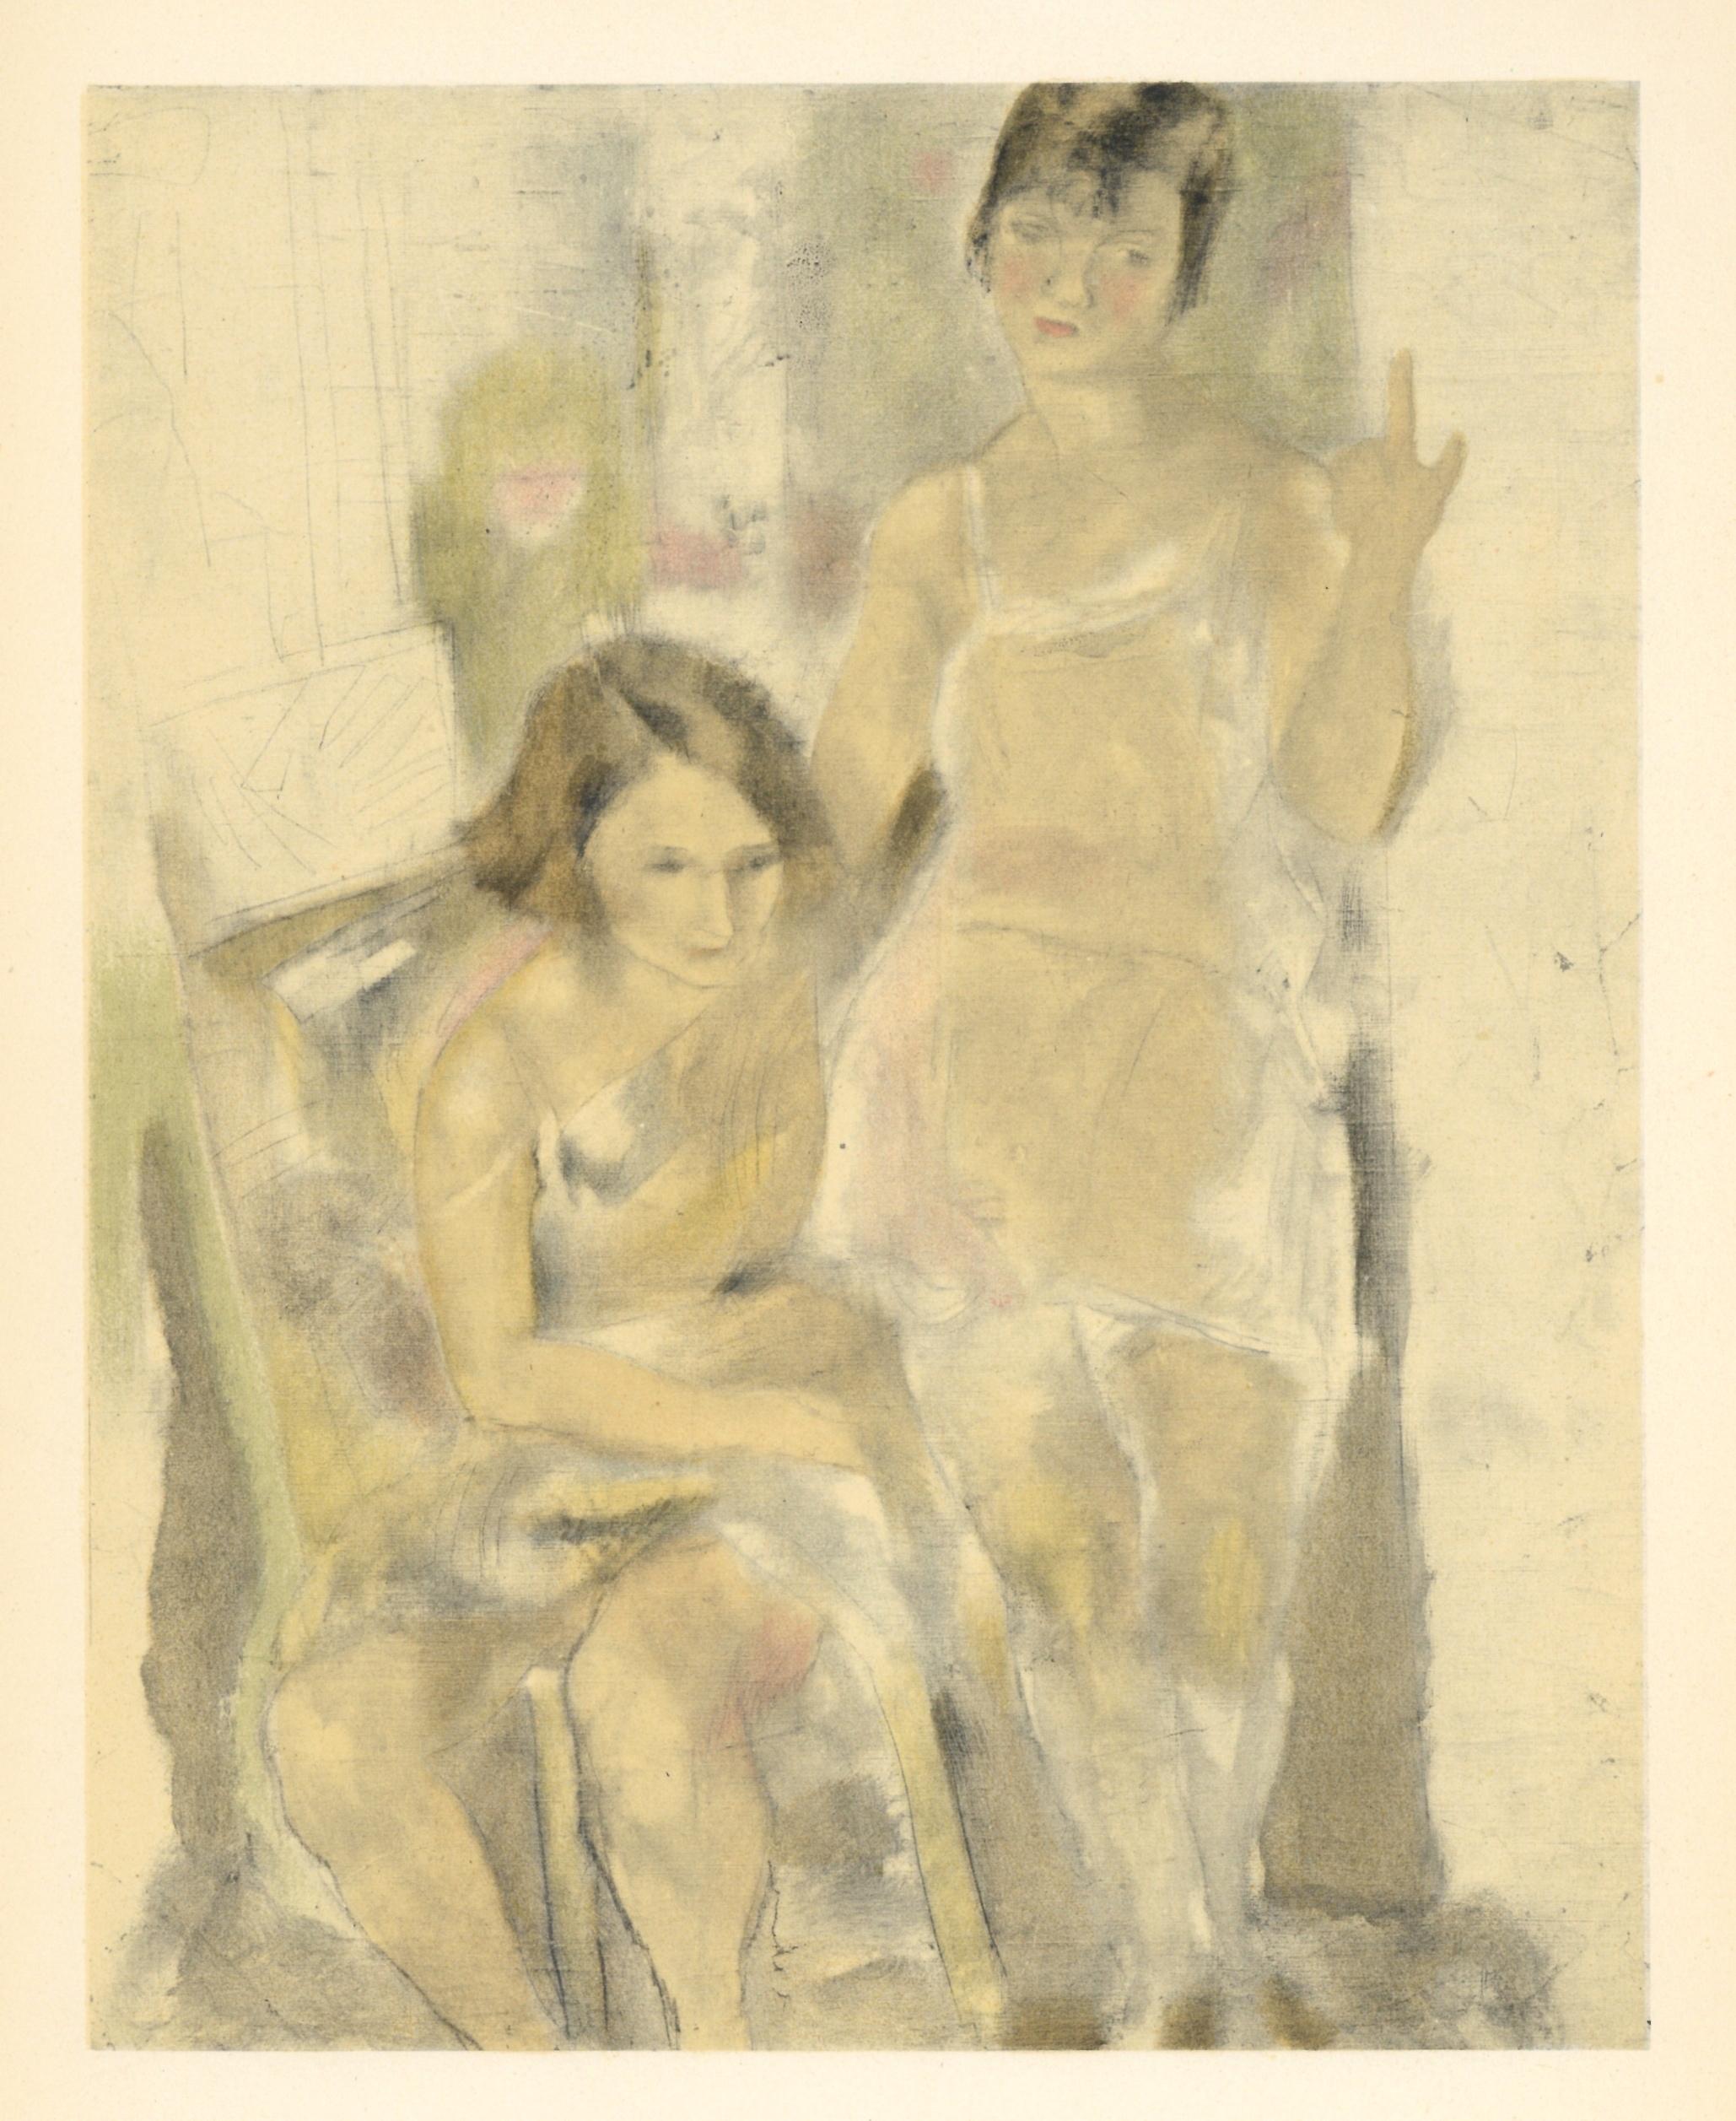 Medium: lithograph (after the painting). Printed in Paris in 1954 at the atelier of Mourlot Frères in an edition of 2000. Sheet size: 12 1/4 x 9 1/2 inches (315 x 245 mm). Not signed.